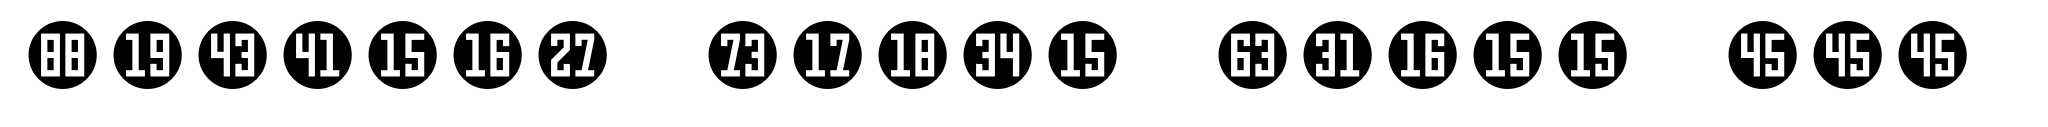 Numbers Style Three Circle Negative image